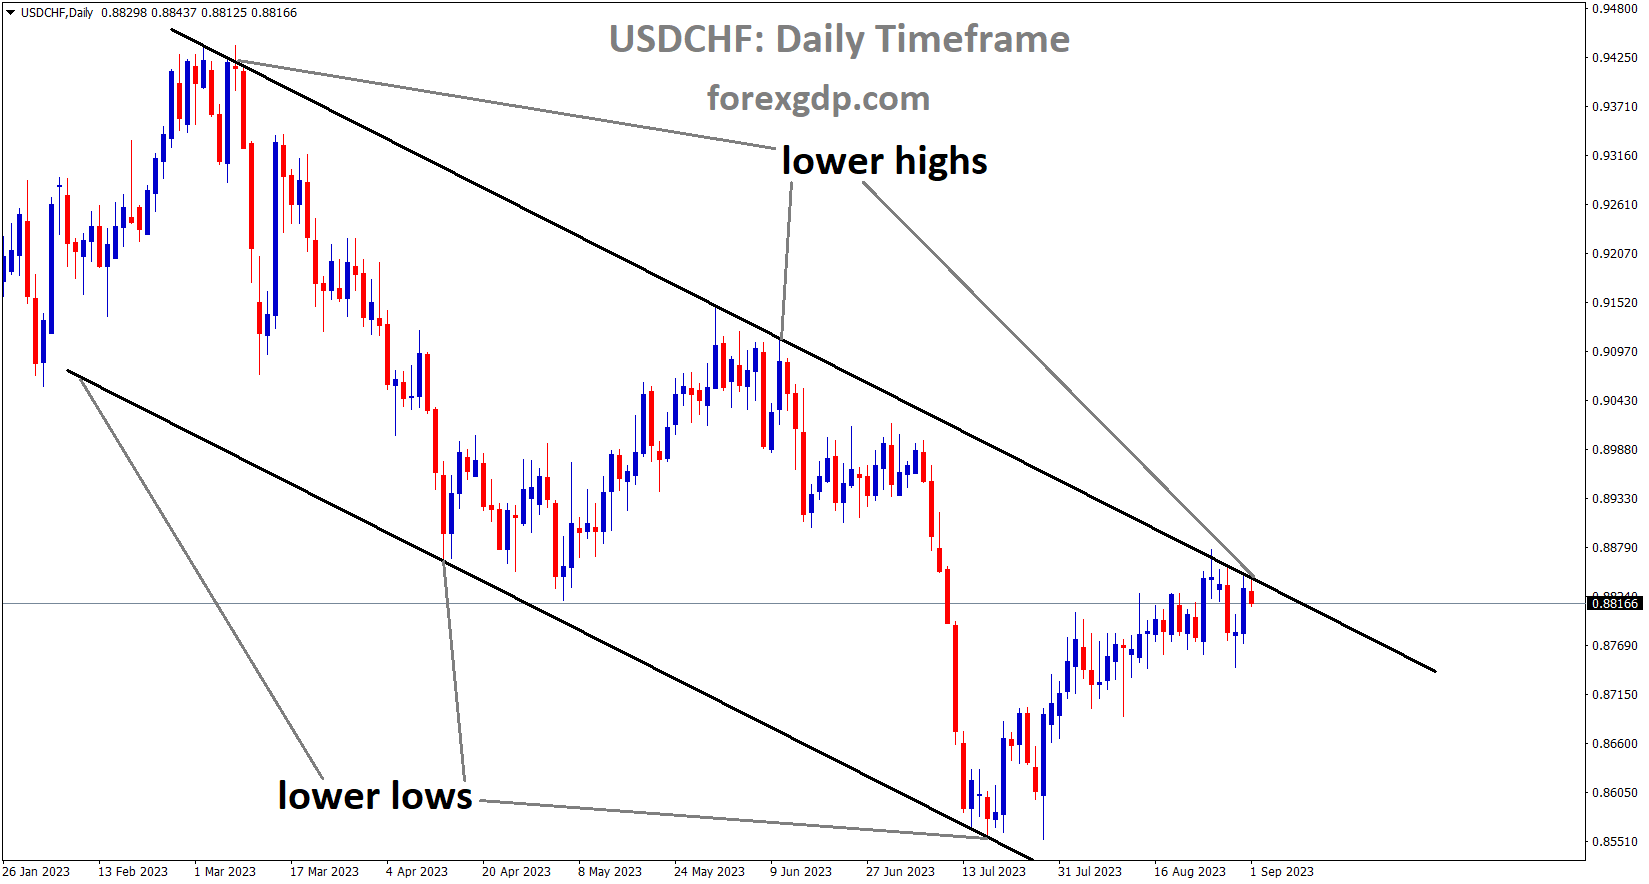 USDCHF is moving in the Descending channel and the market has fallen from the lower high area of the channel